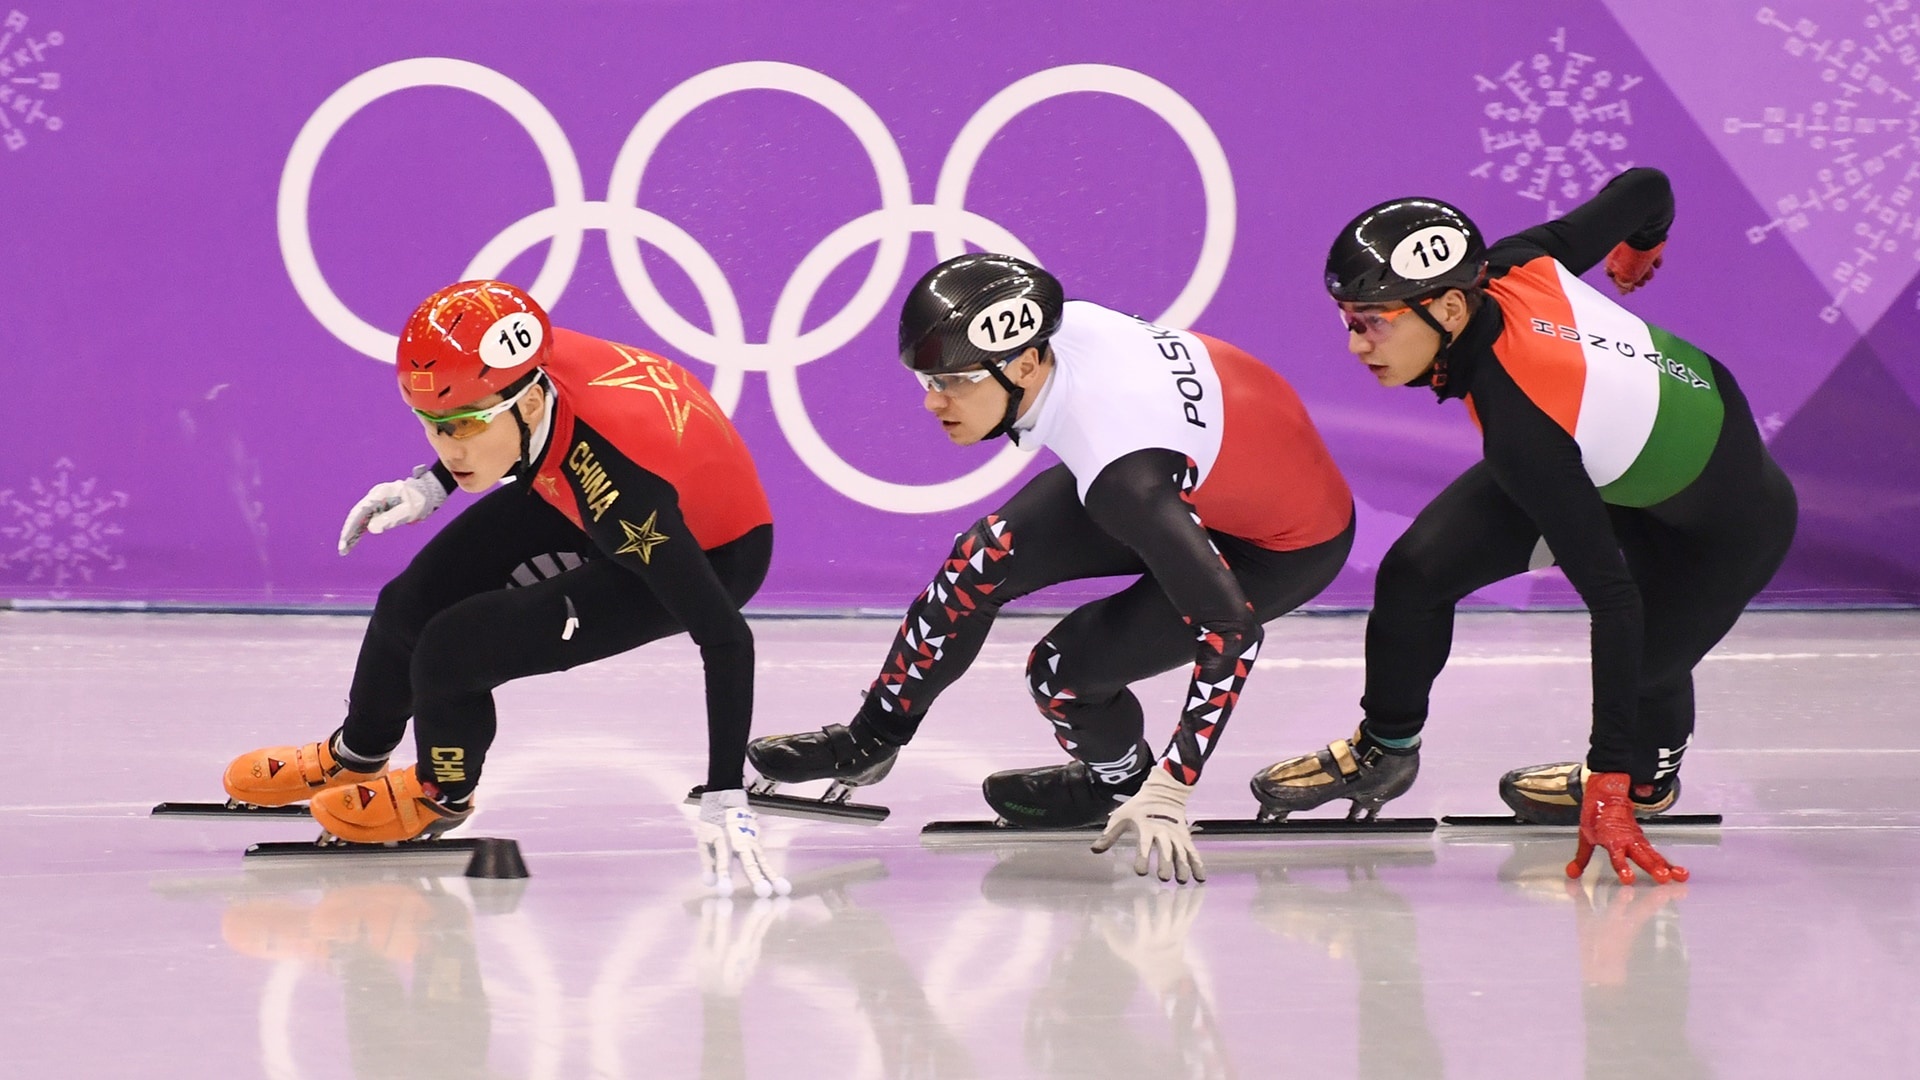 Speed Skating: Fast-paced sport, 2022 Winter Olympics, Short track speed skating, Mixed team relay. 1920x1080 Full HD Background.